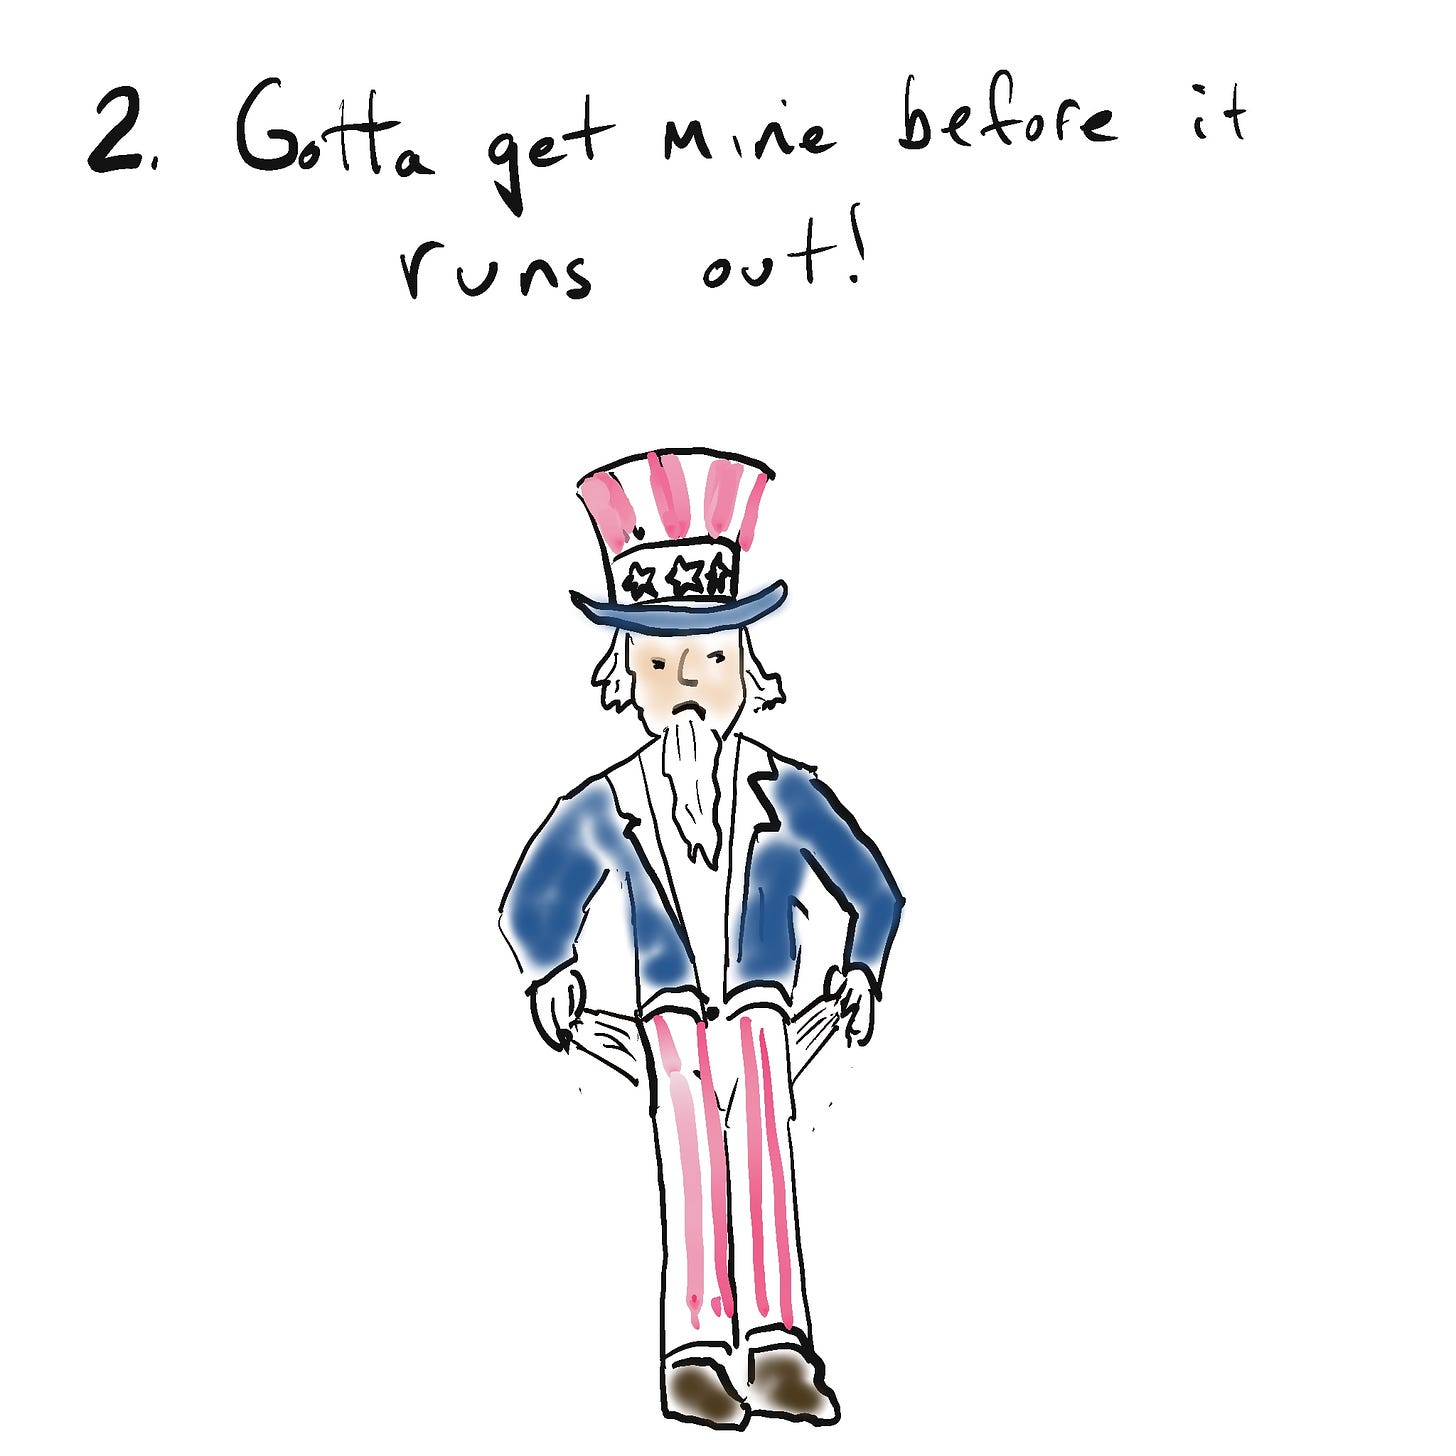 Uncle Sam pulling his pockets out